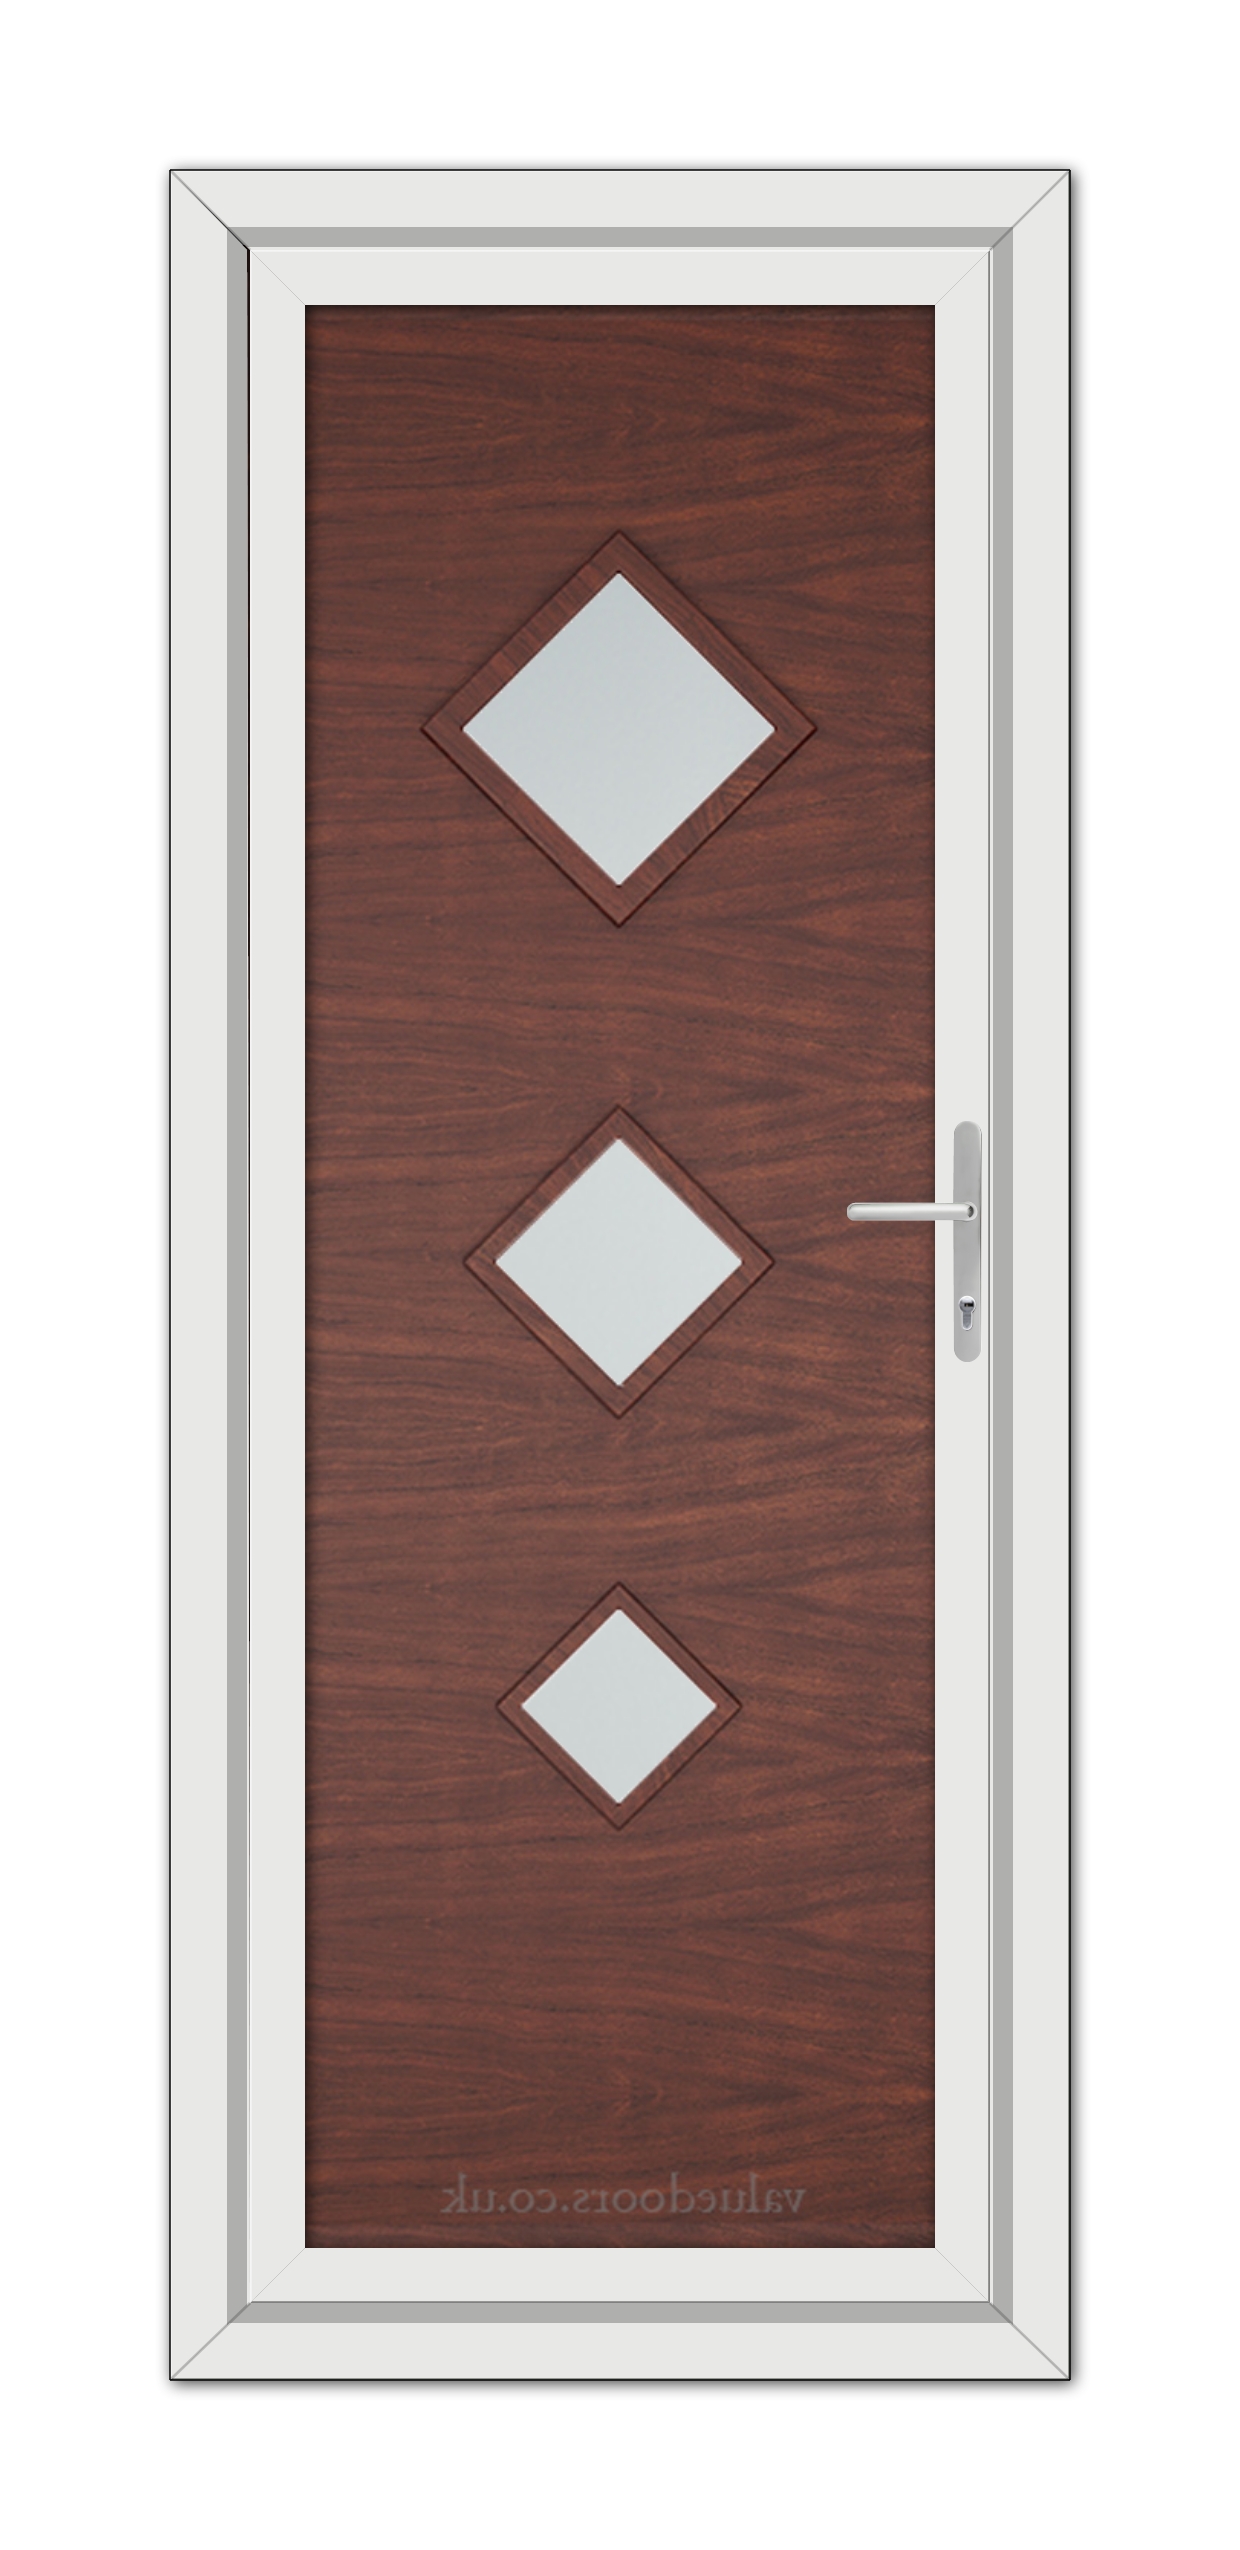 A Rosewood Modern 5123 uPVC door with a wooden finish, featuring three diamond-shaped windows and a silver handle, set within a white frame.